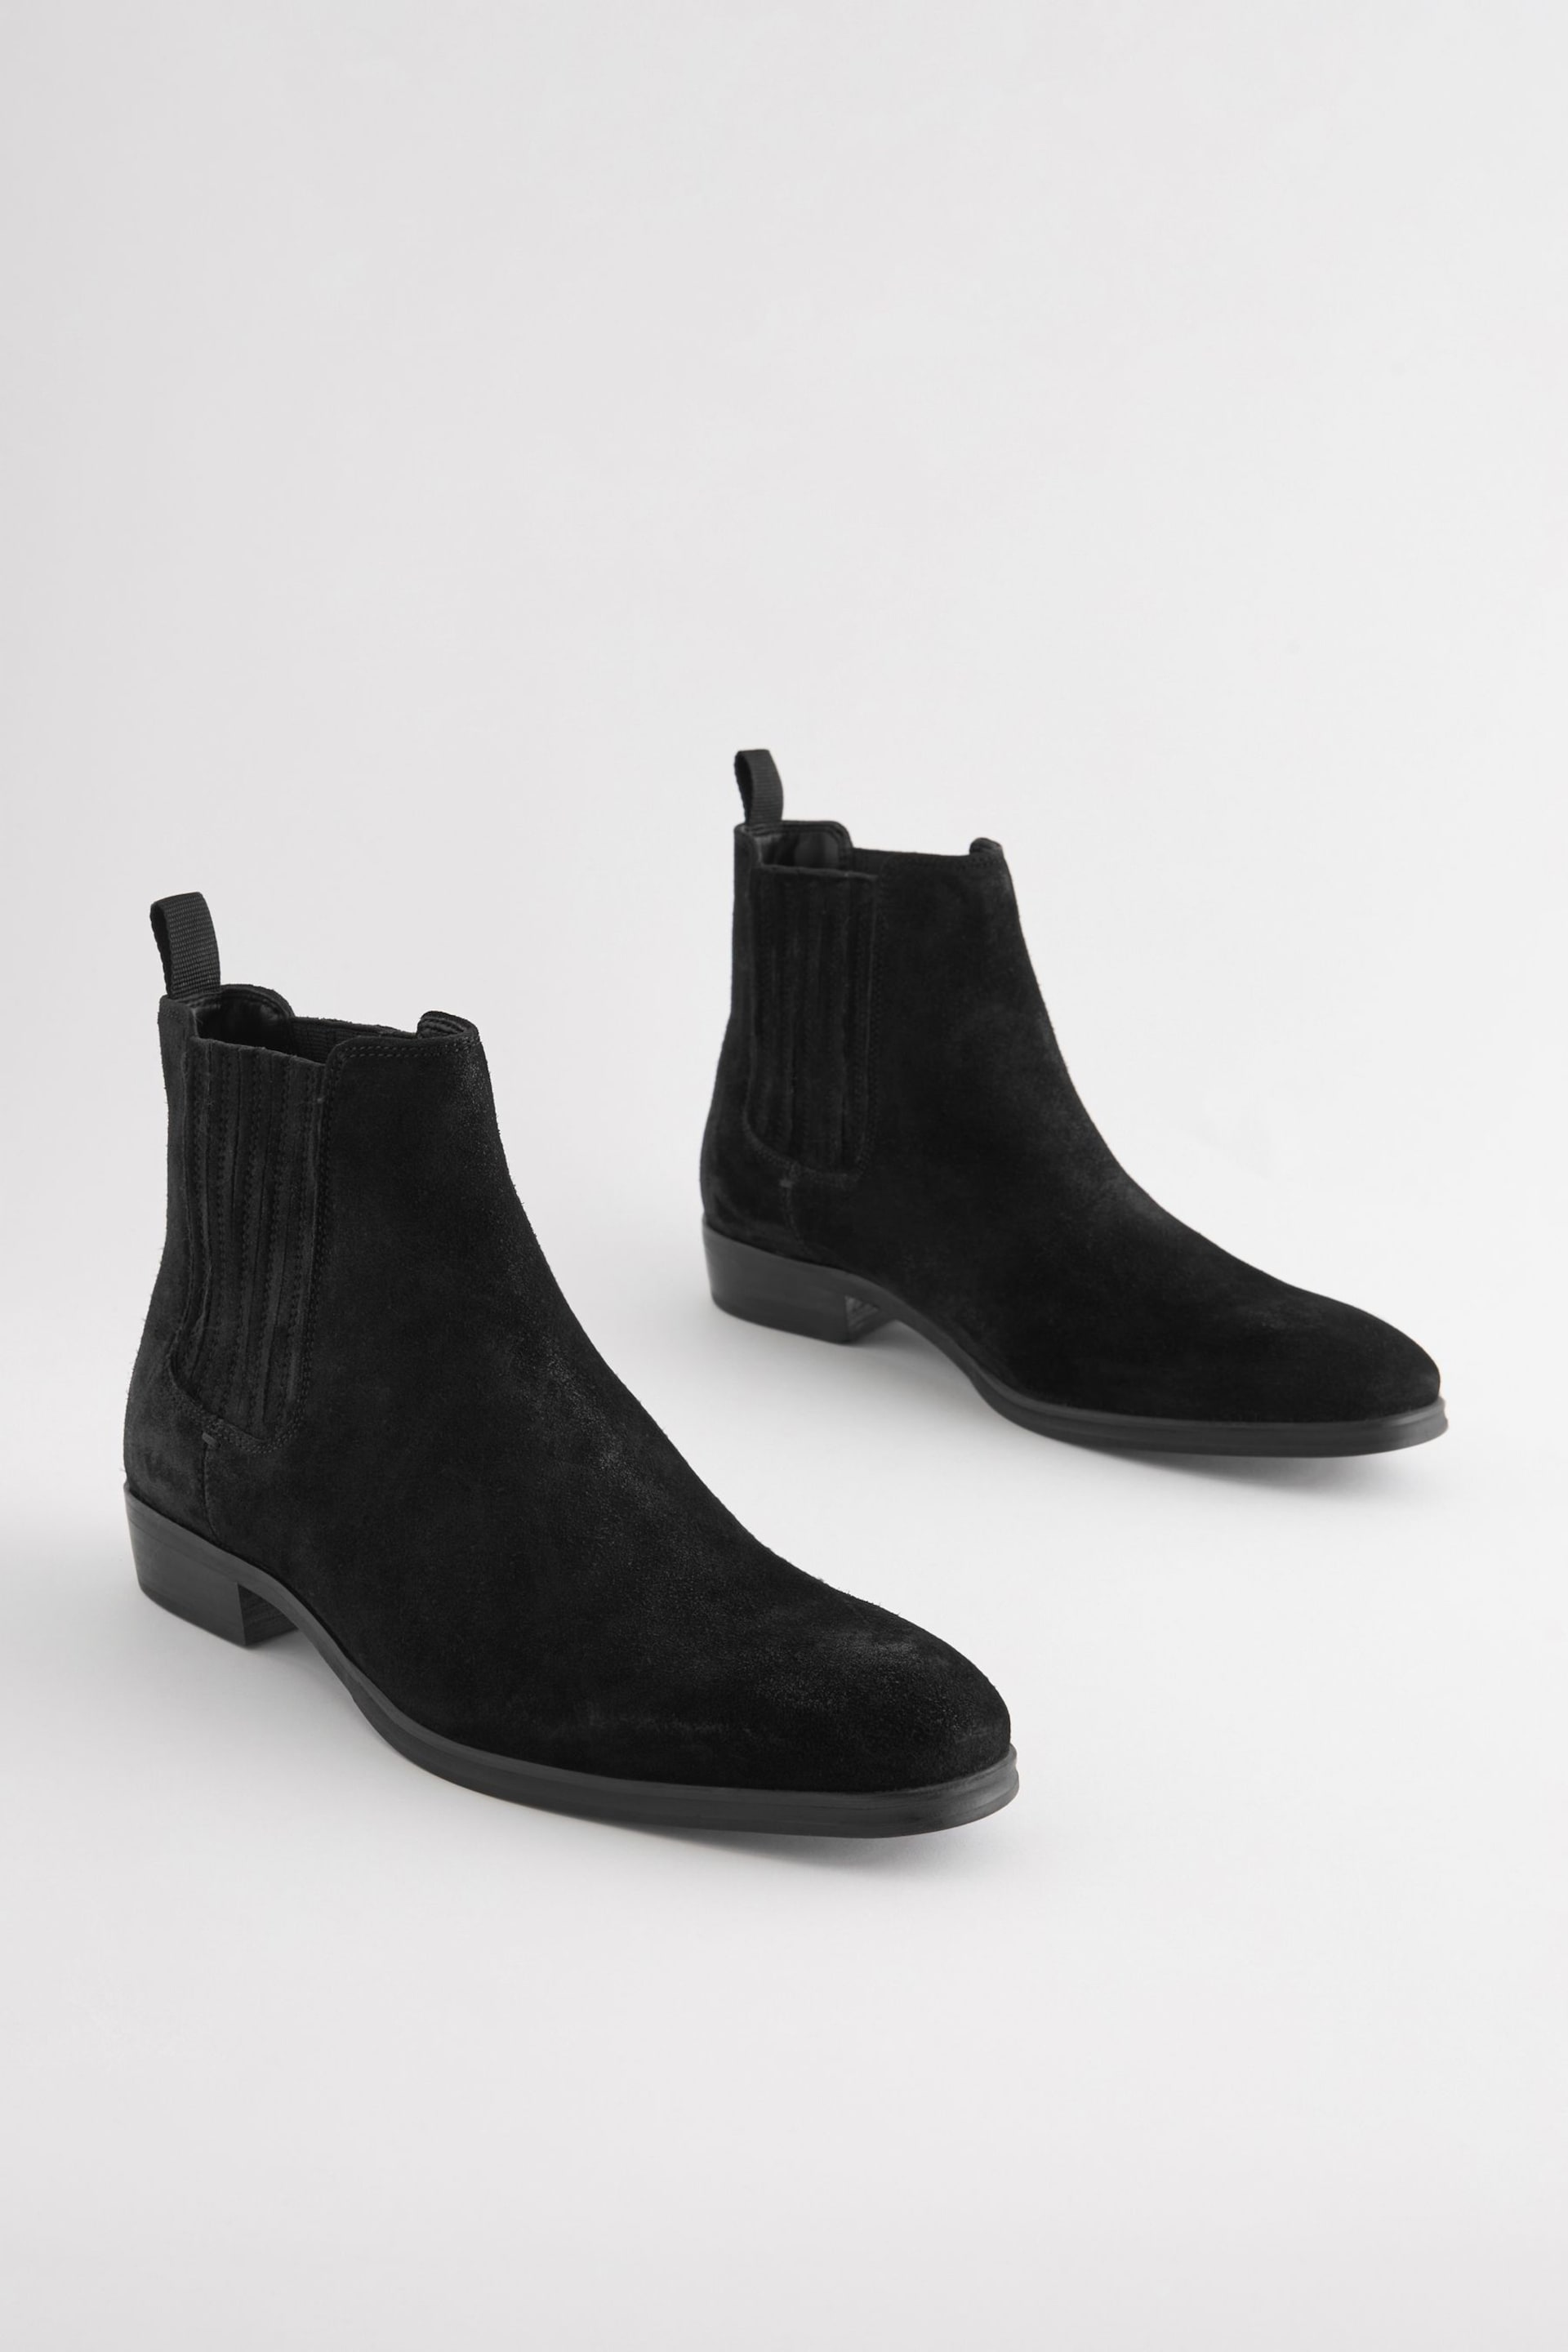 Black Suede Chelsea Boots - Image 3 of 6